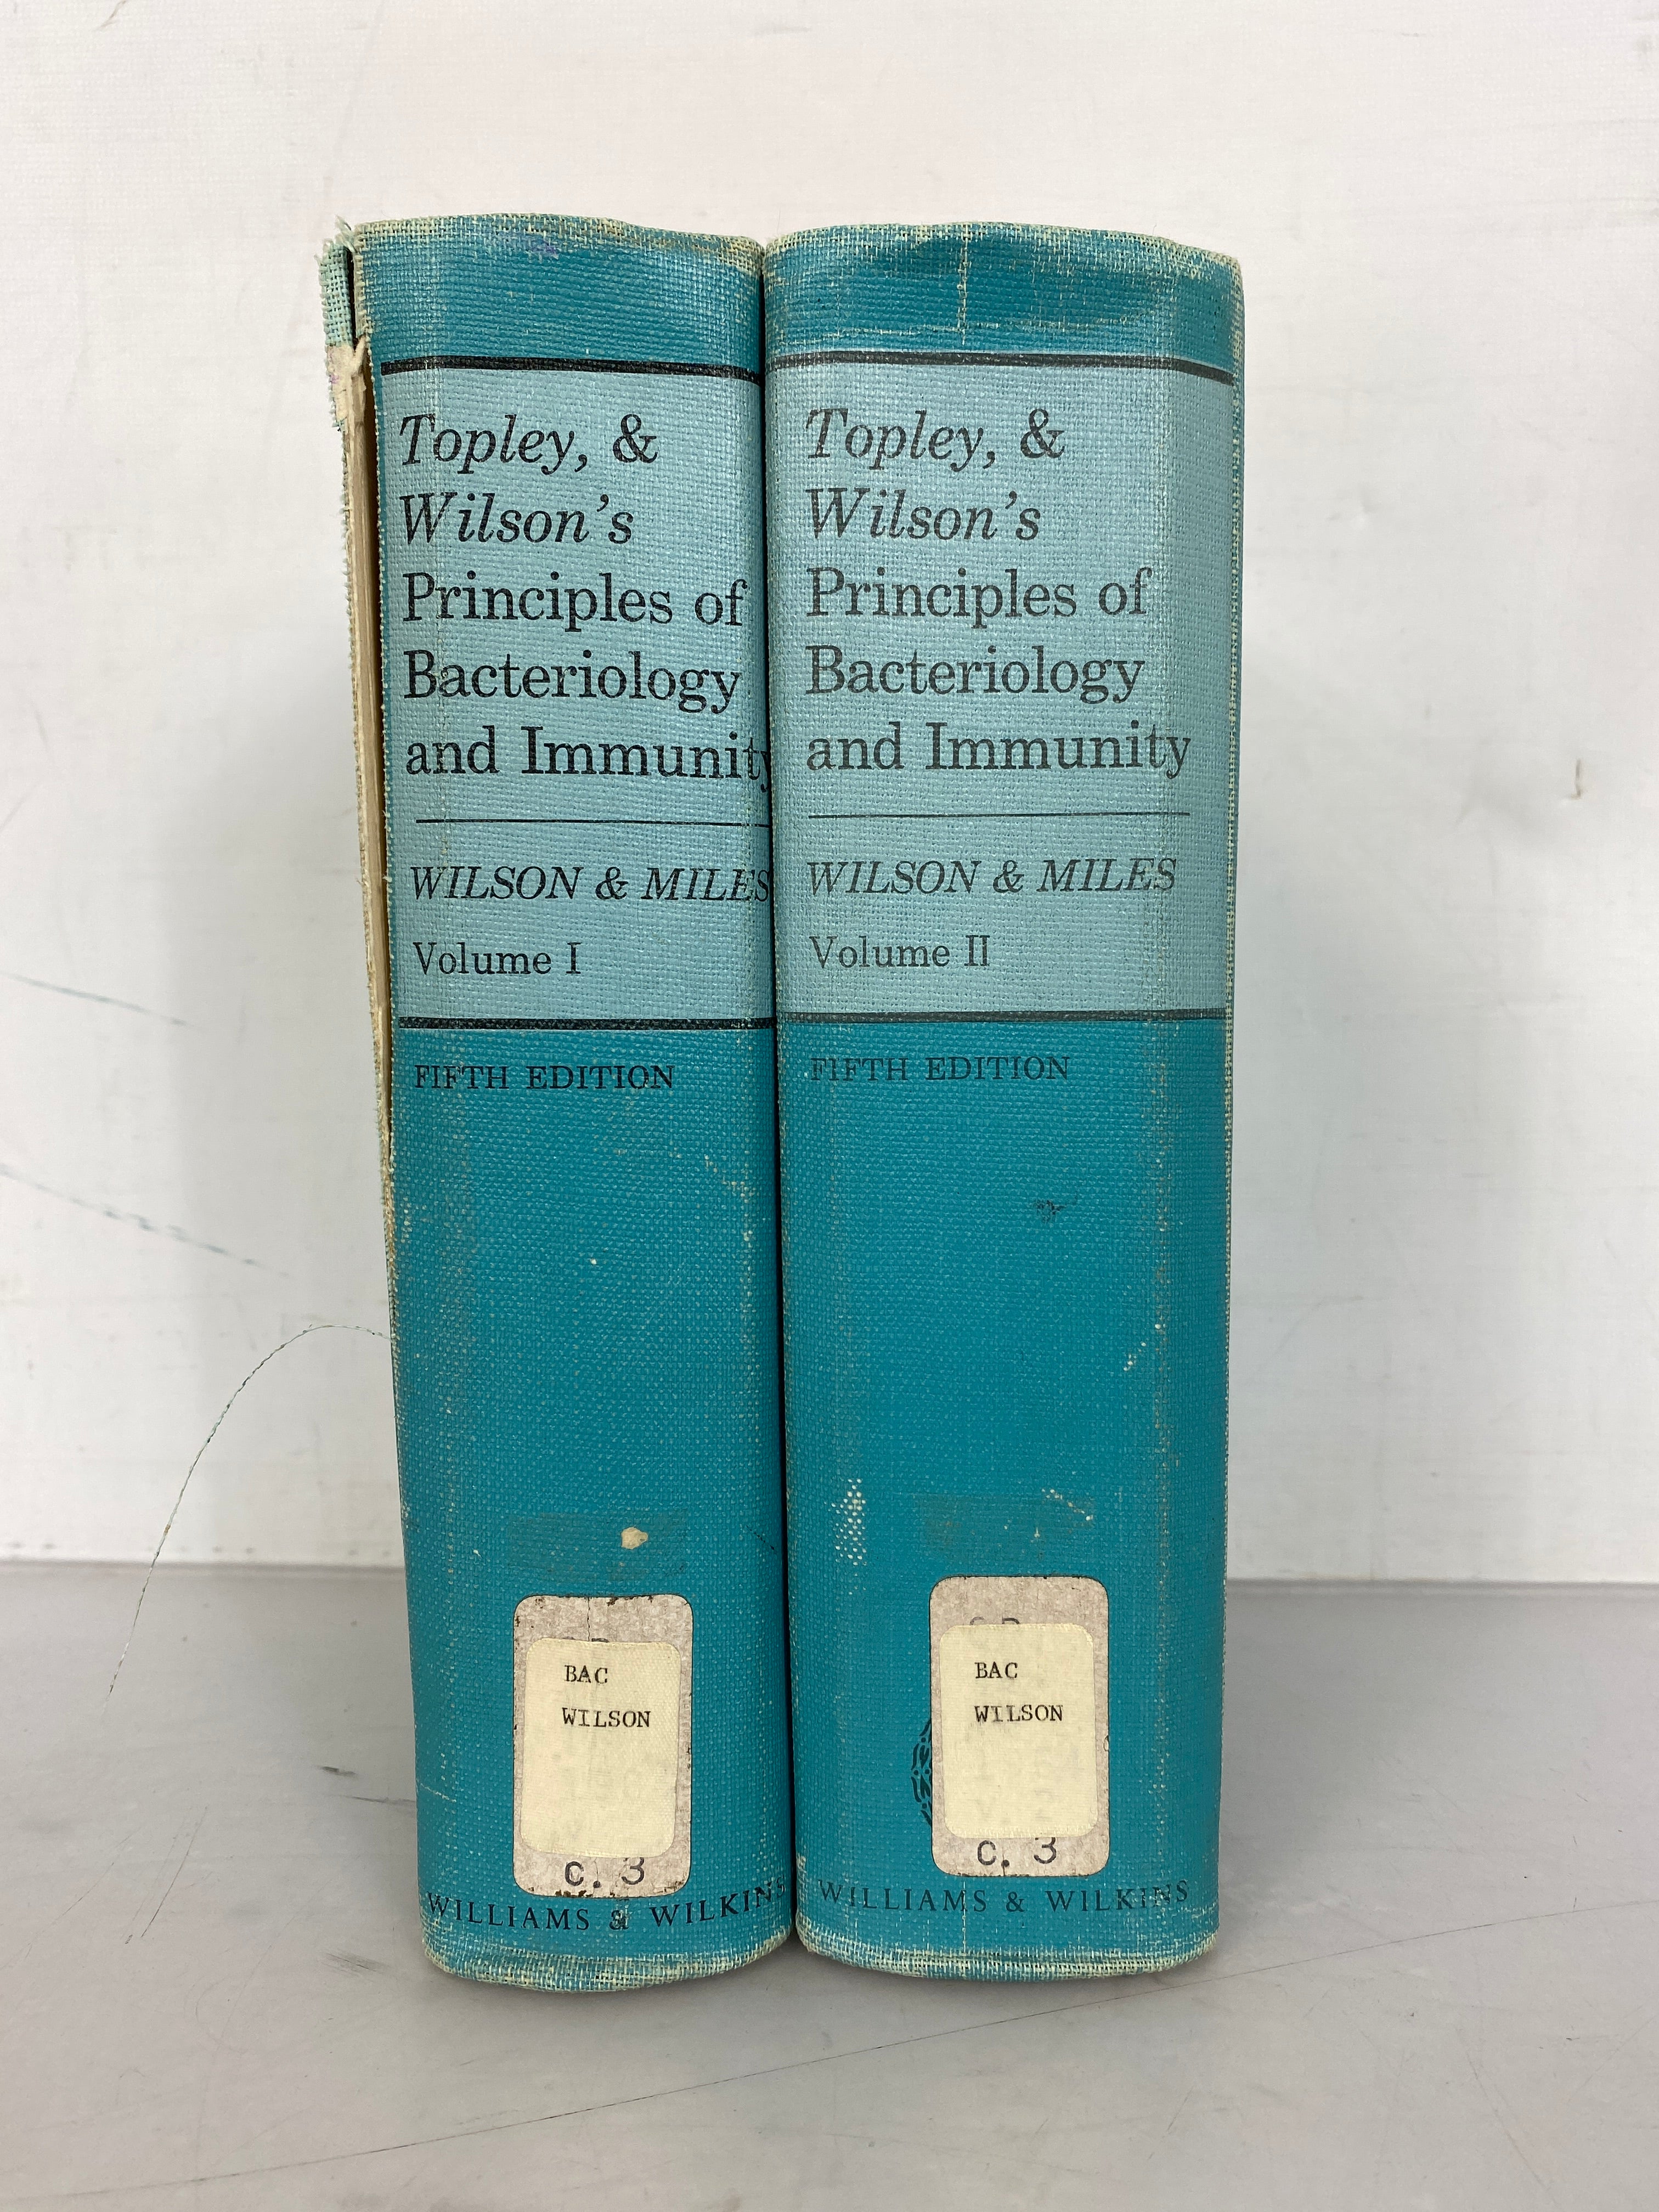 Topley & Wilson's Principles of Bacteriology and Immunity 2 Volume Set 1964 HC